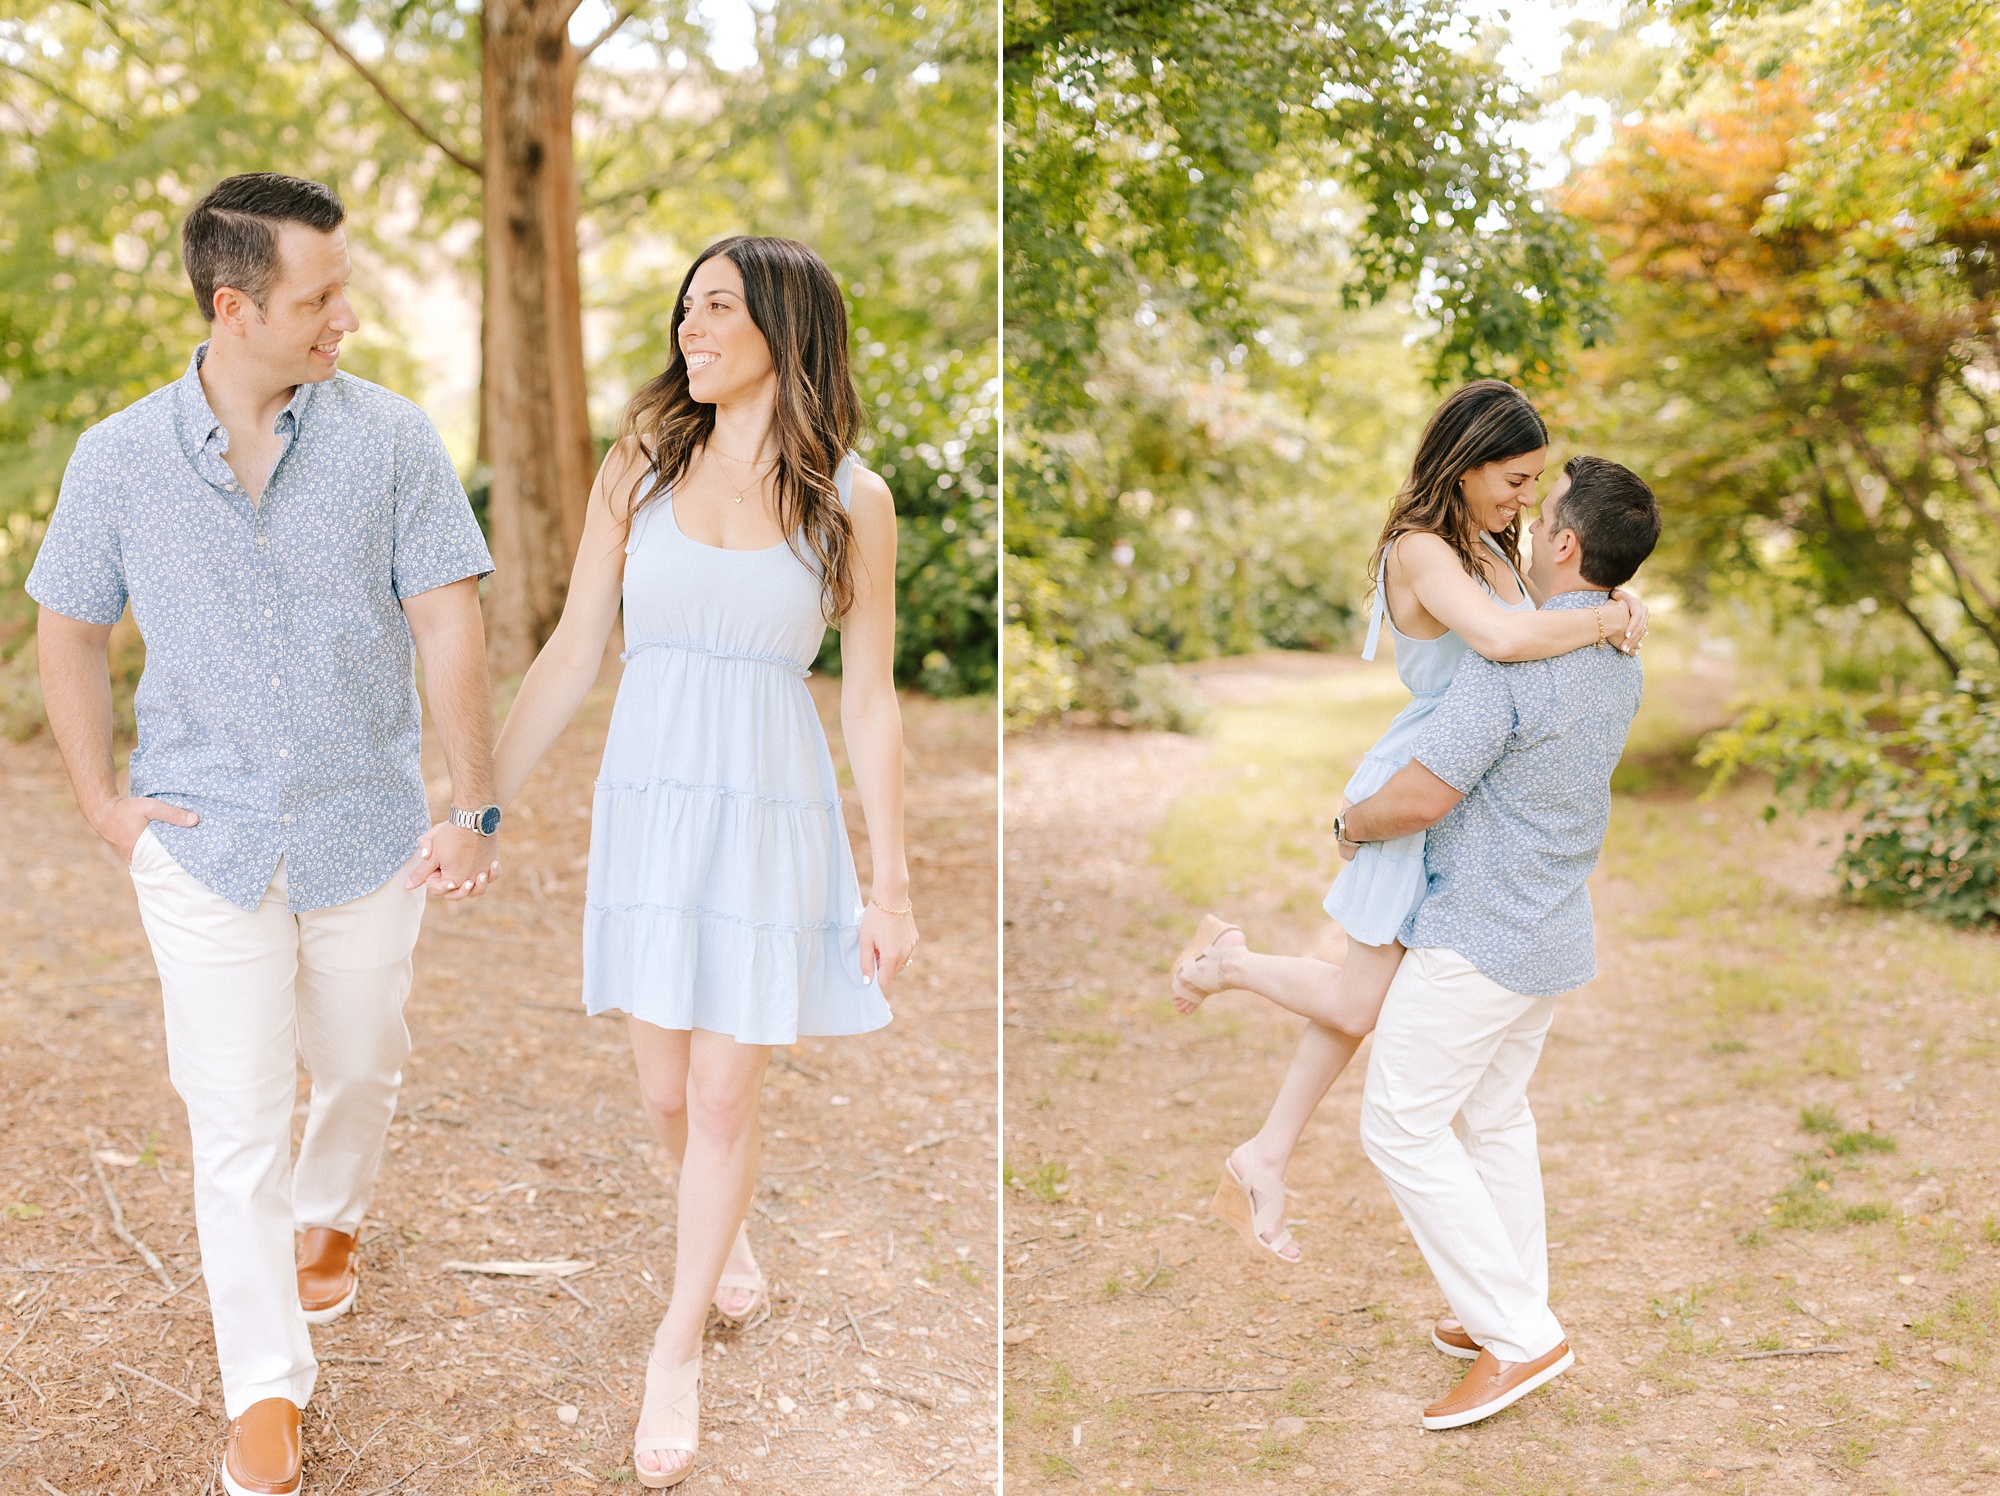 groom lifts bride up during spring JC Raulston Arboretum engagement session 